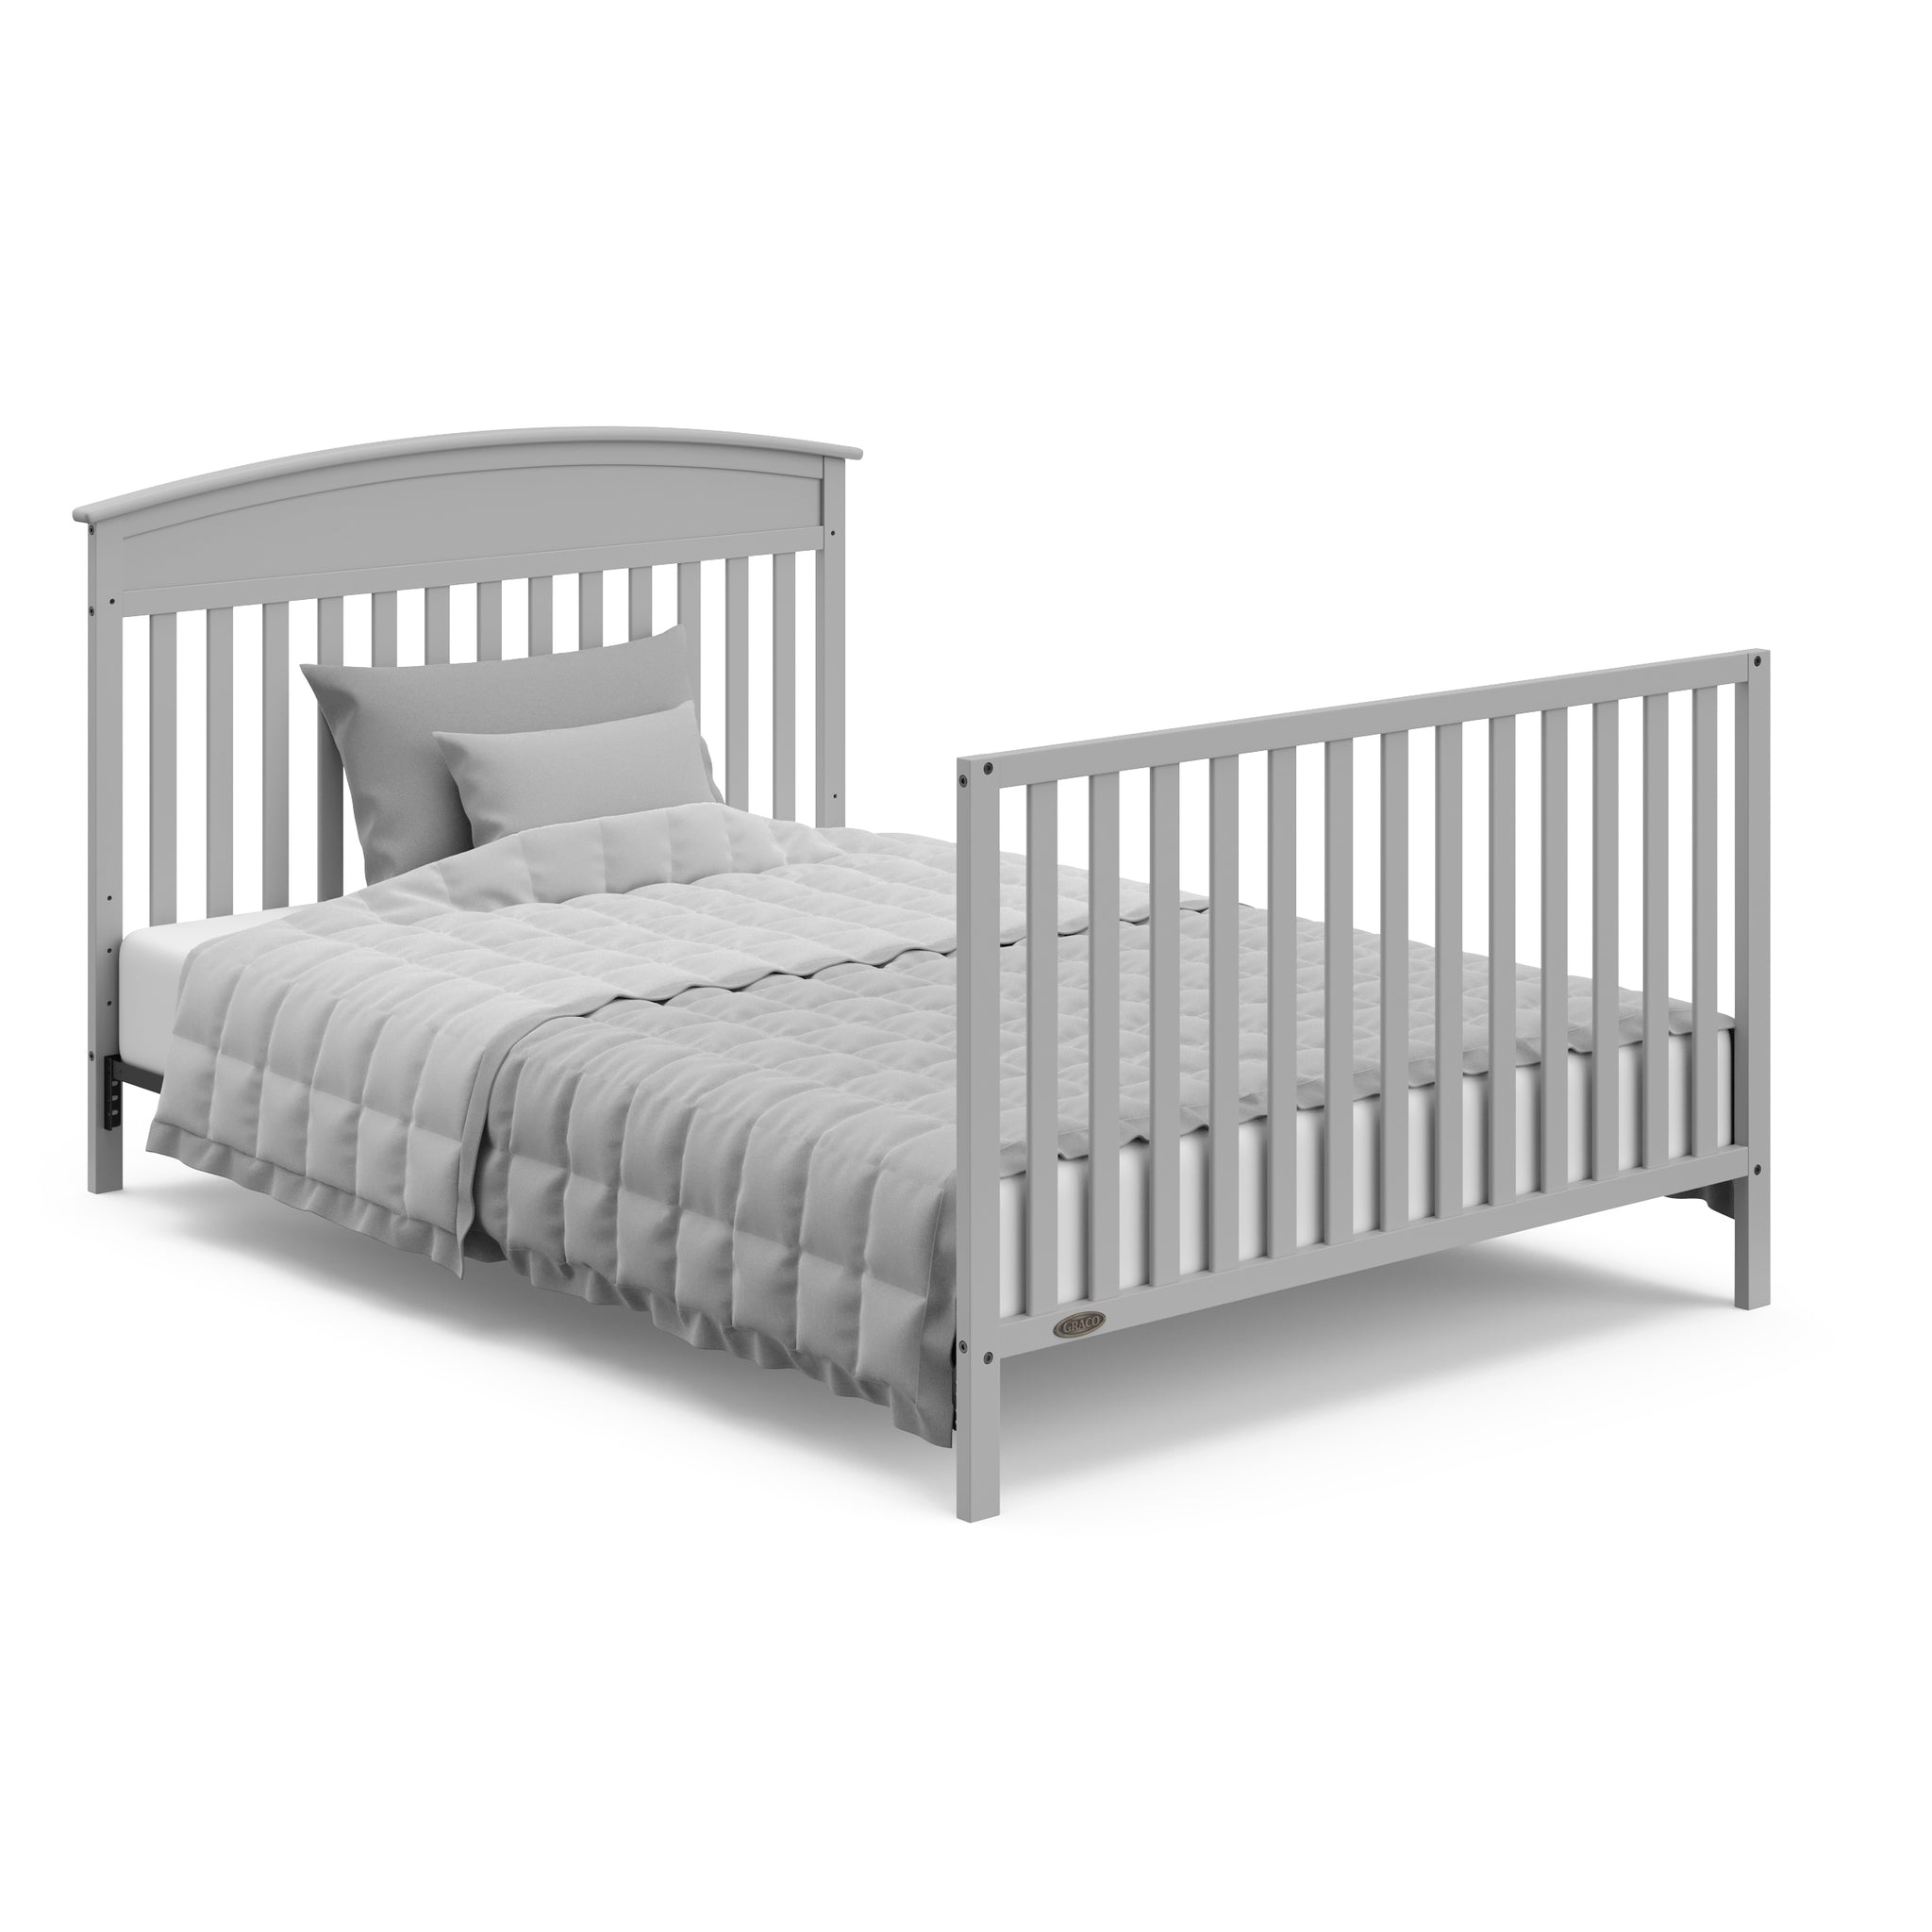 pebble gray crib in full-size bed with headboard and footbaord conversion